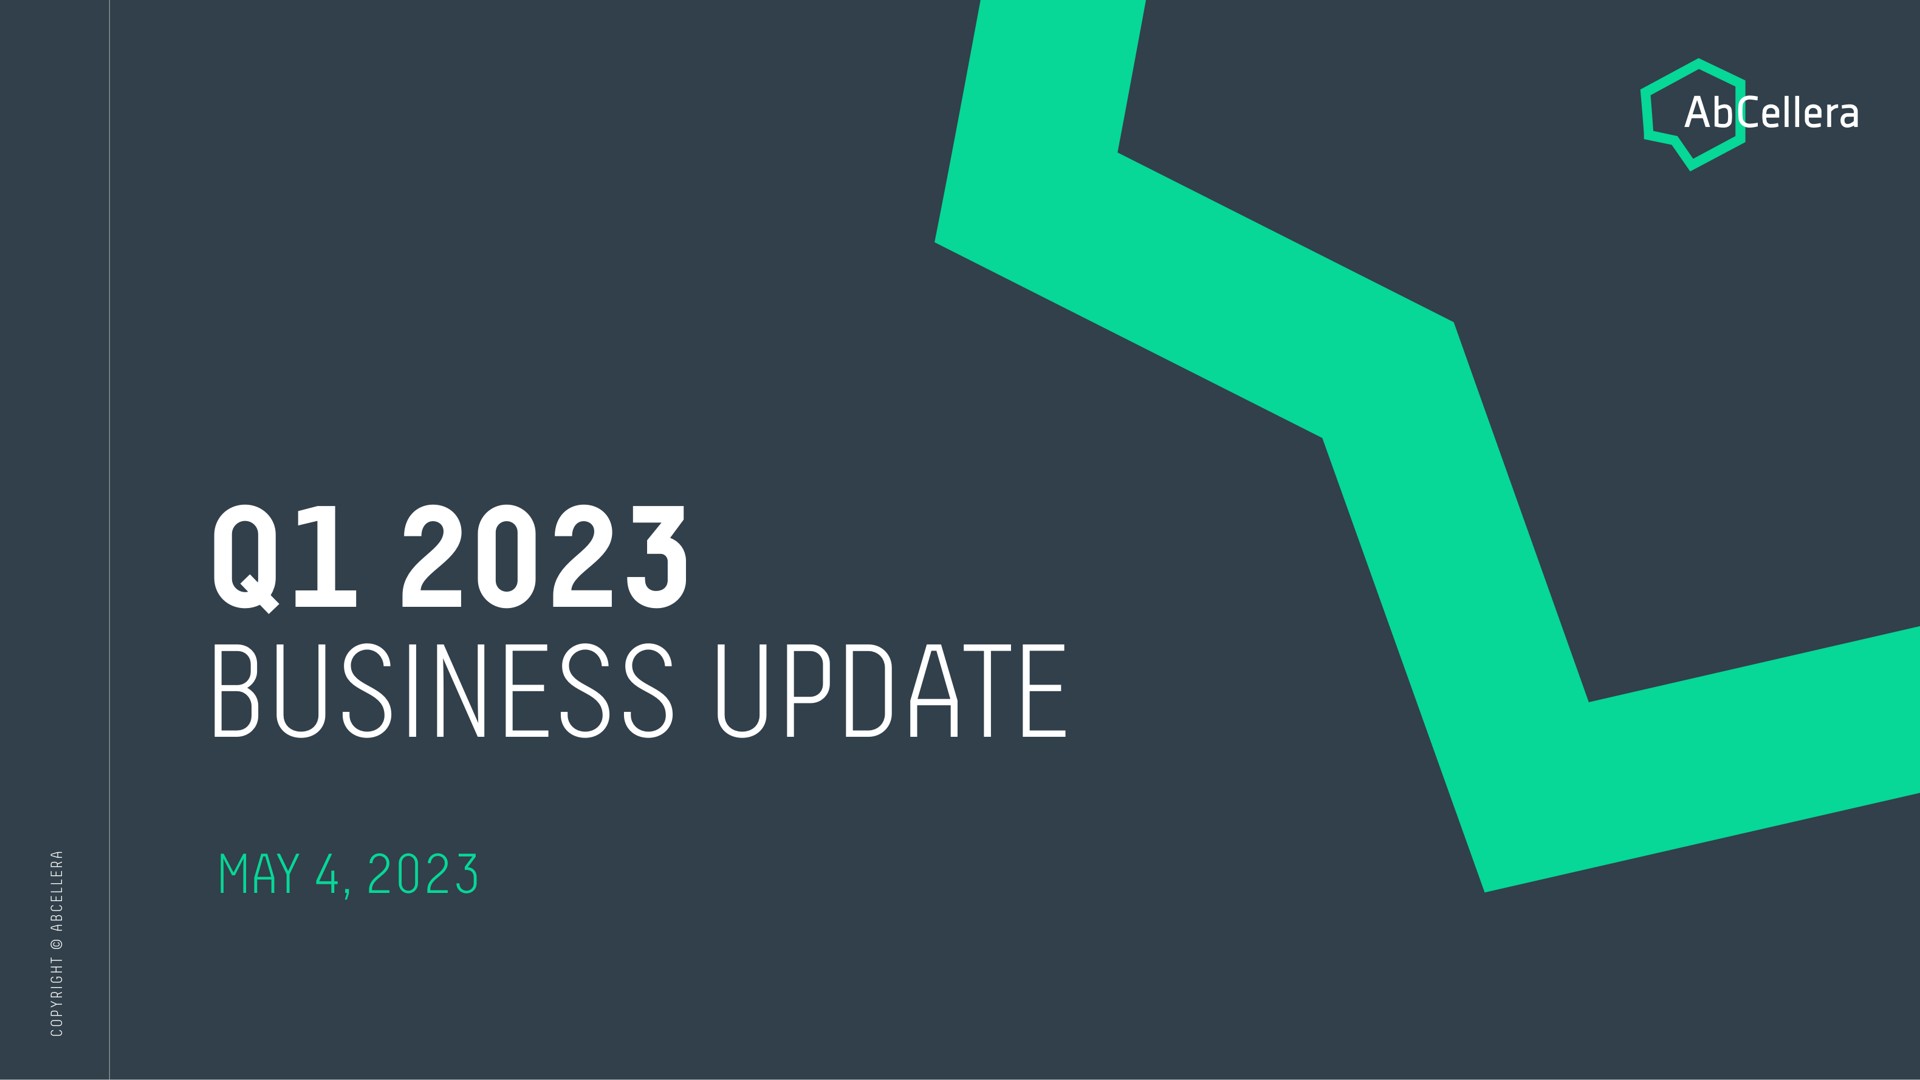 business update may | AbCellera